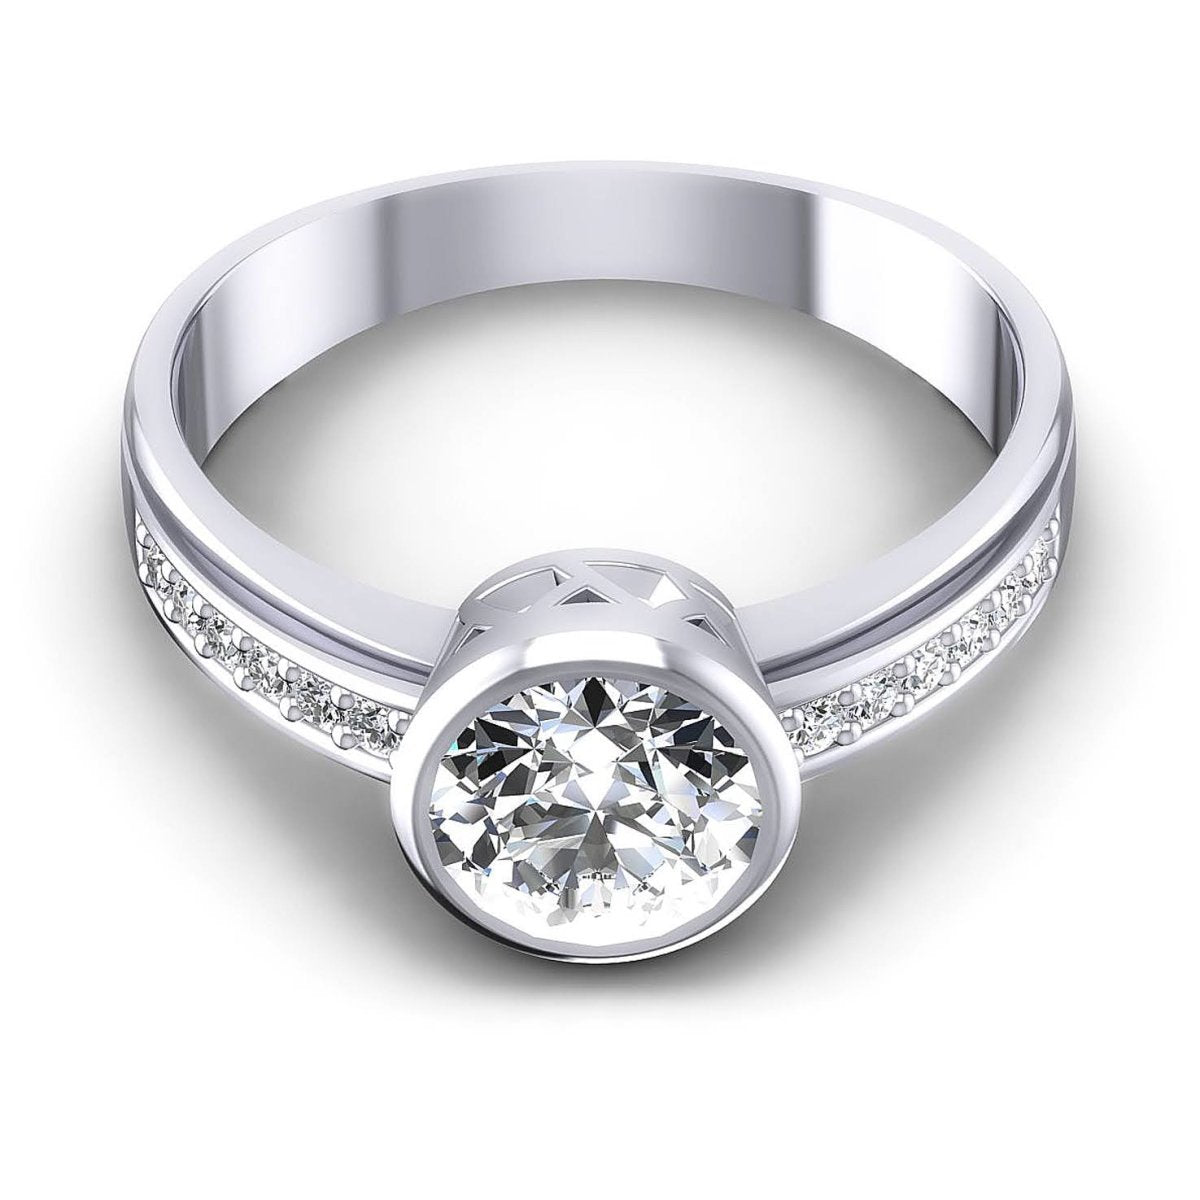 Stunning 0.50 CT Round Cut Diamond Engagement Ring in 14 KT White Gold - Primestyle.com